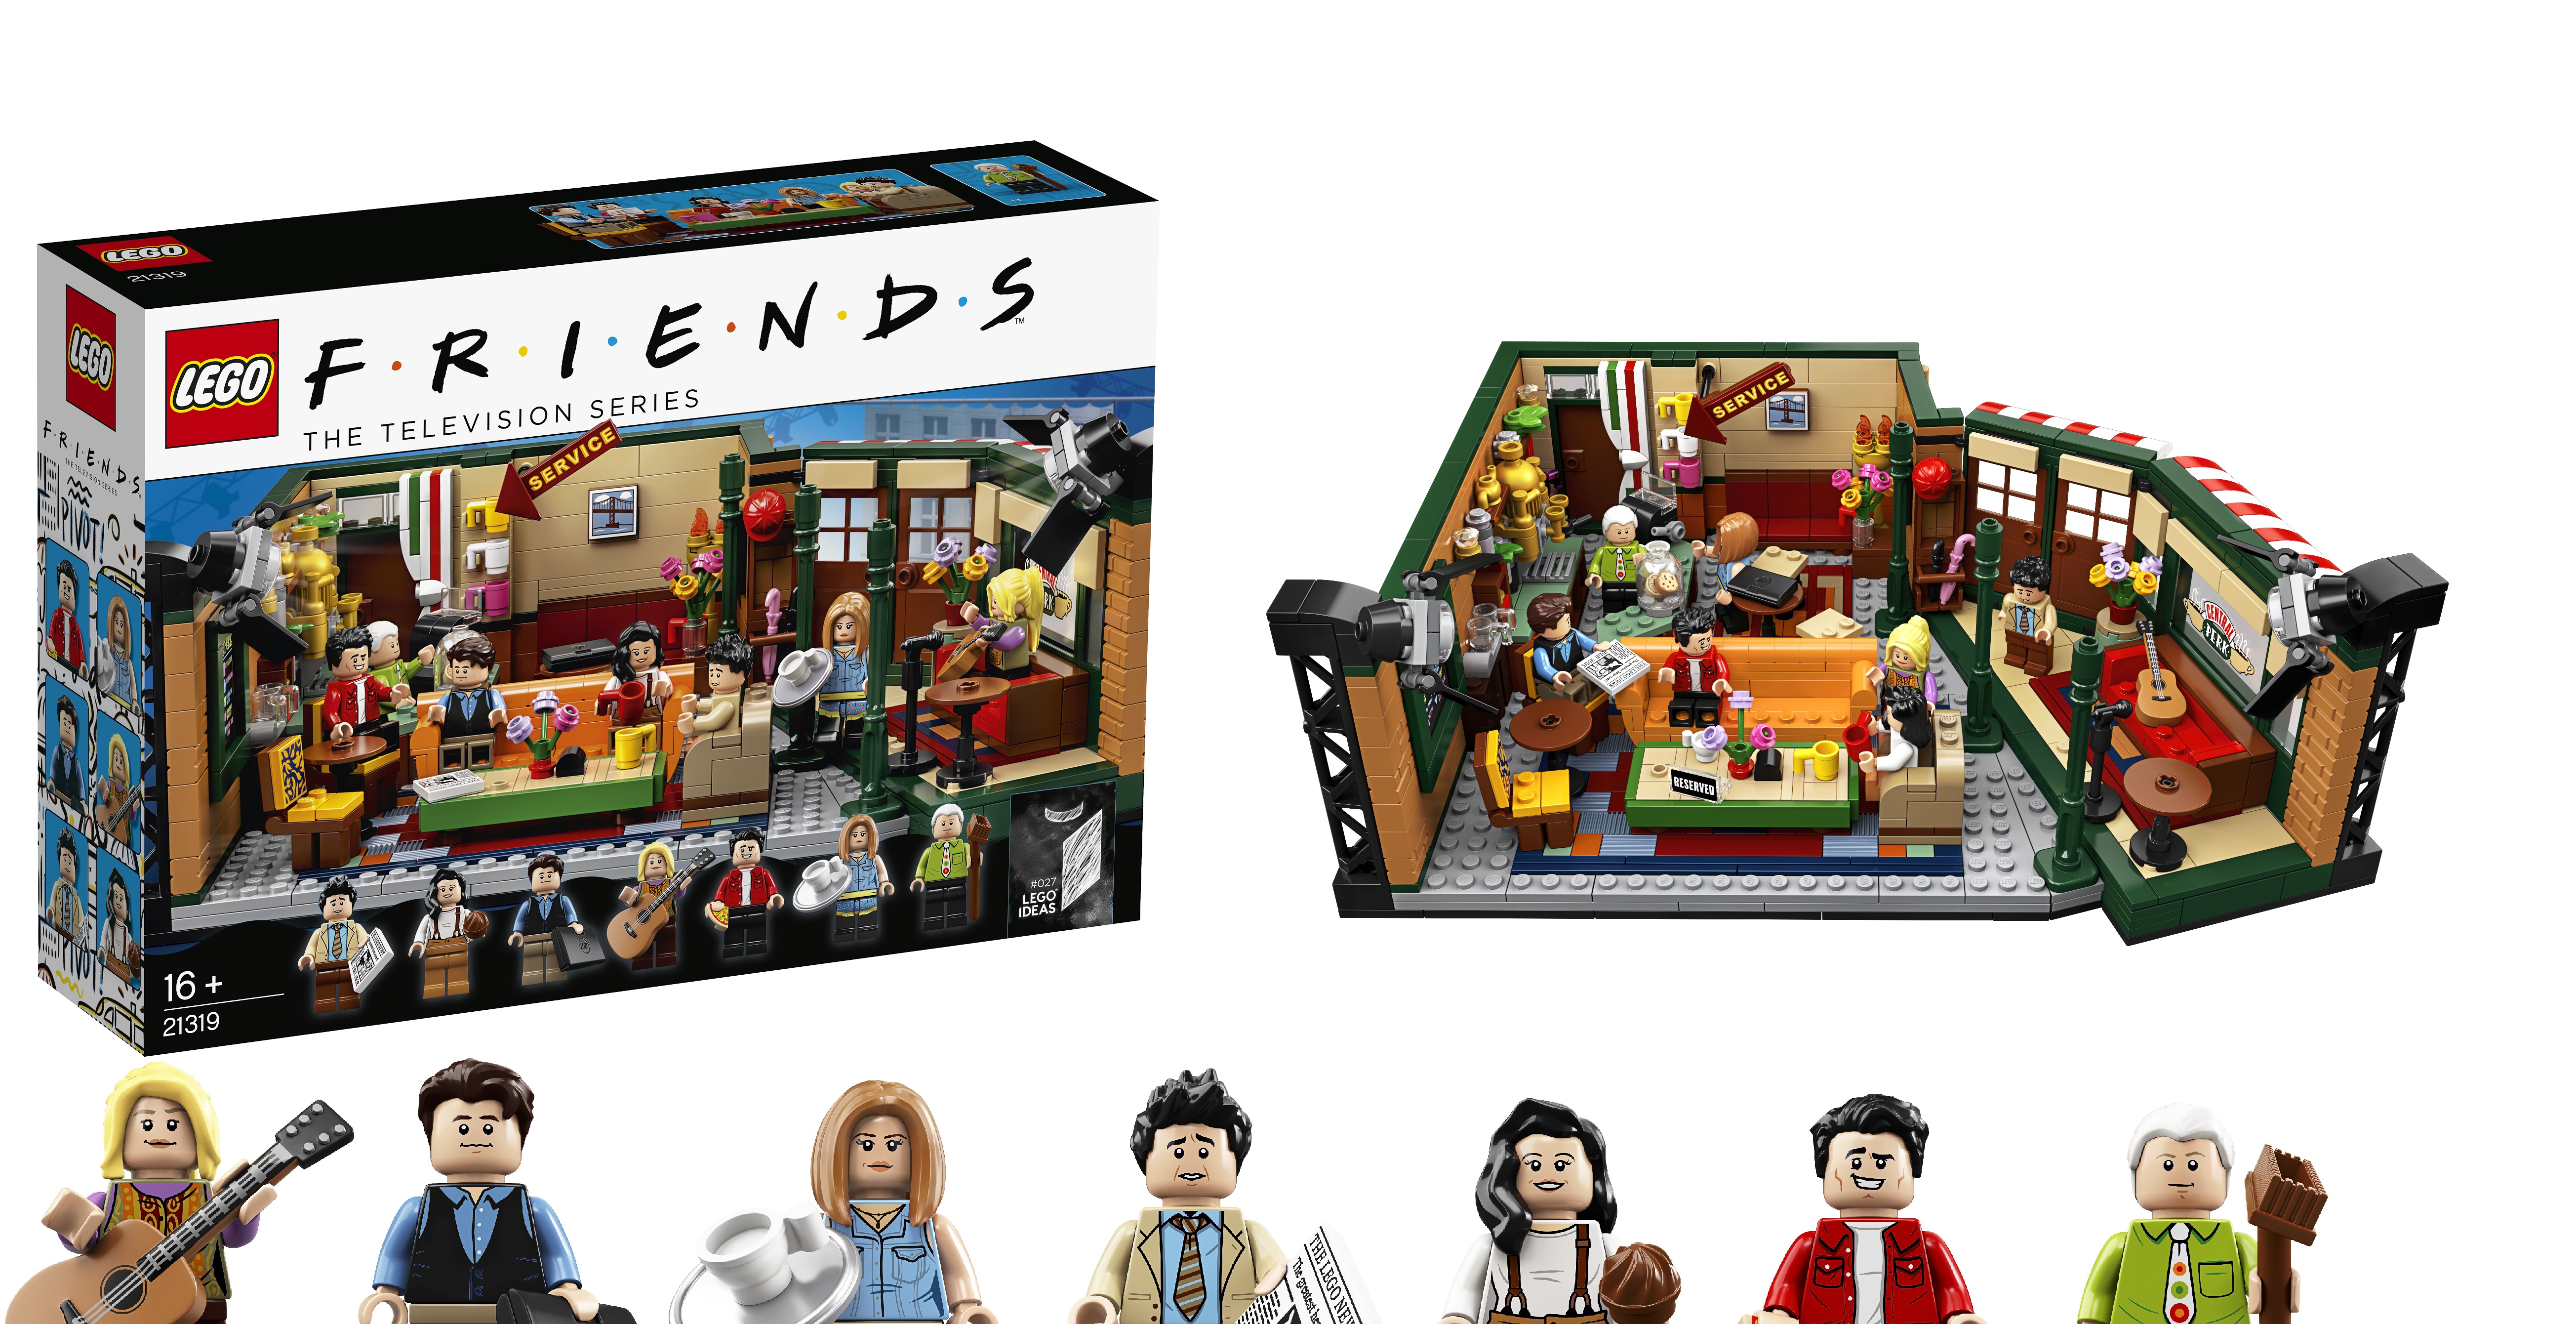 duft Troende Have en picnic 21319 Friends Central Perk LEGO set officially unveiled! - Jay's Brick Blog